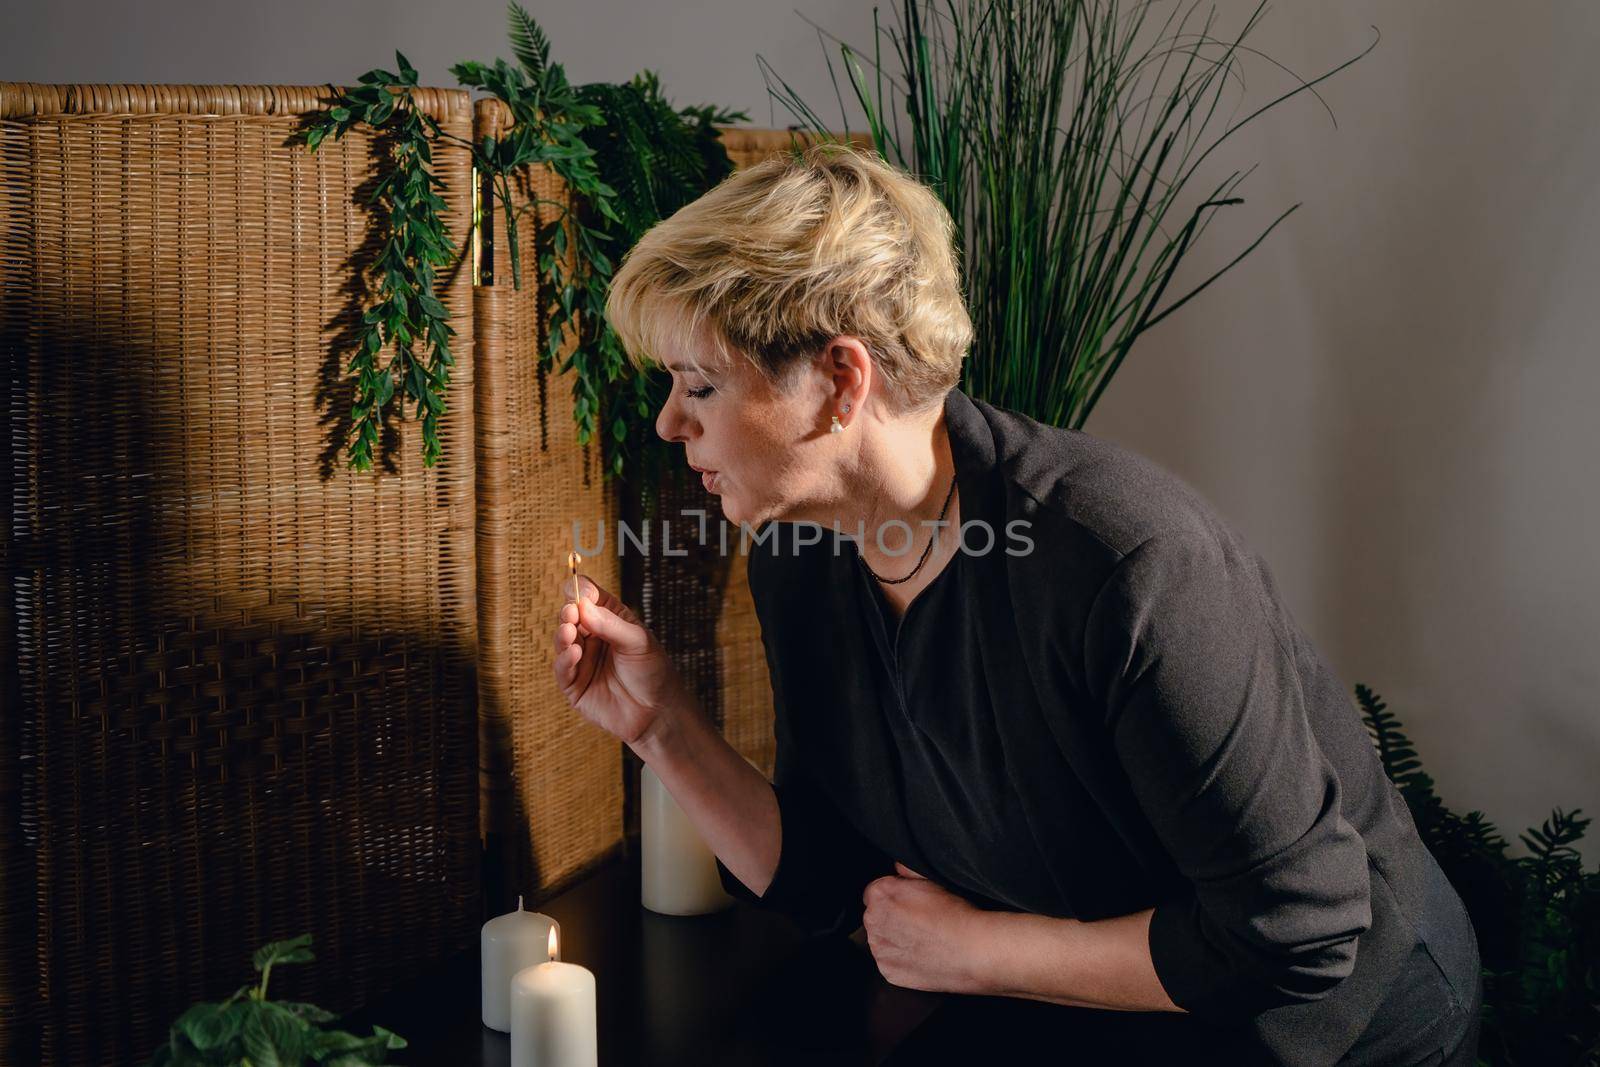 Portrait of a blonde, mature, concentrated and professional beautician, lighting scented candles with a hot wax massage matc.h. Relaxing atmosphere and soft lighting, decoration of plants and candles, massage table in the background and towels. Vertical